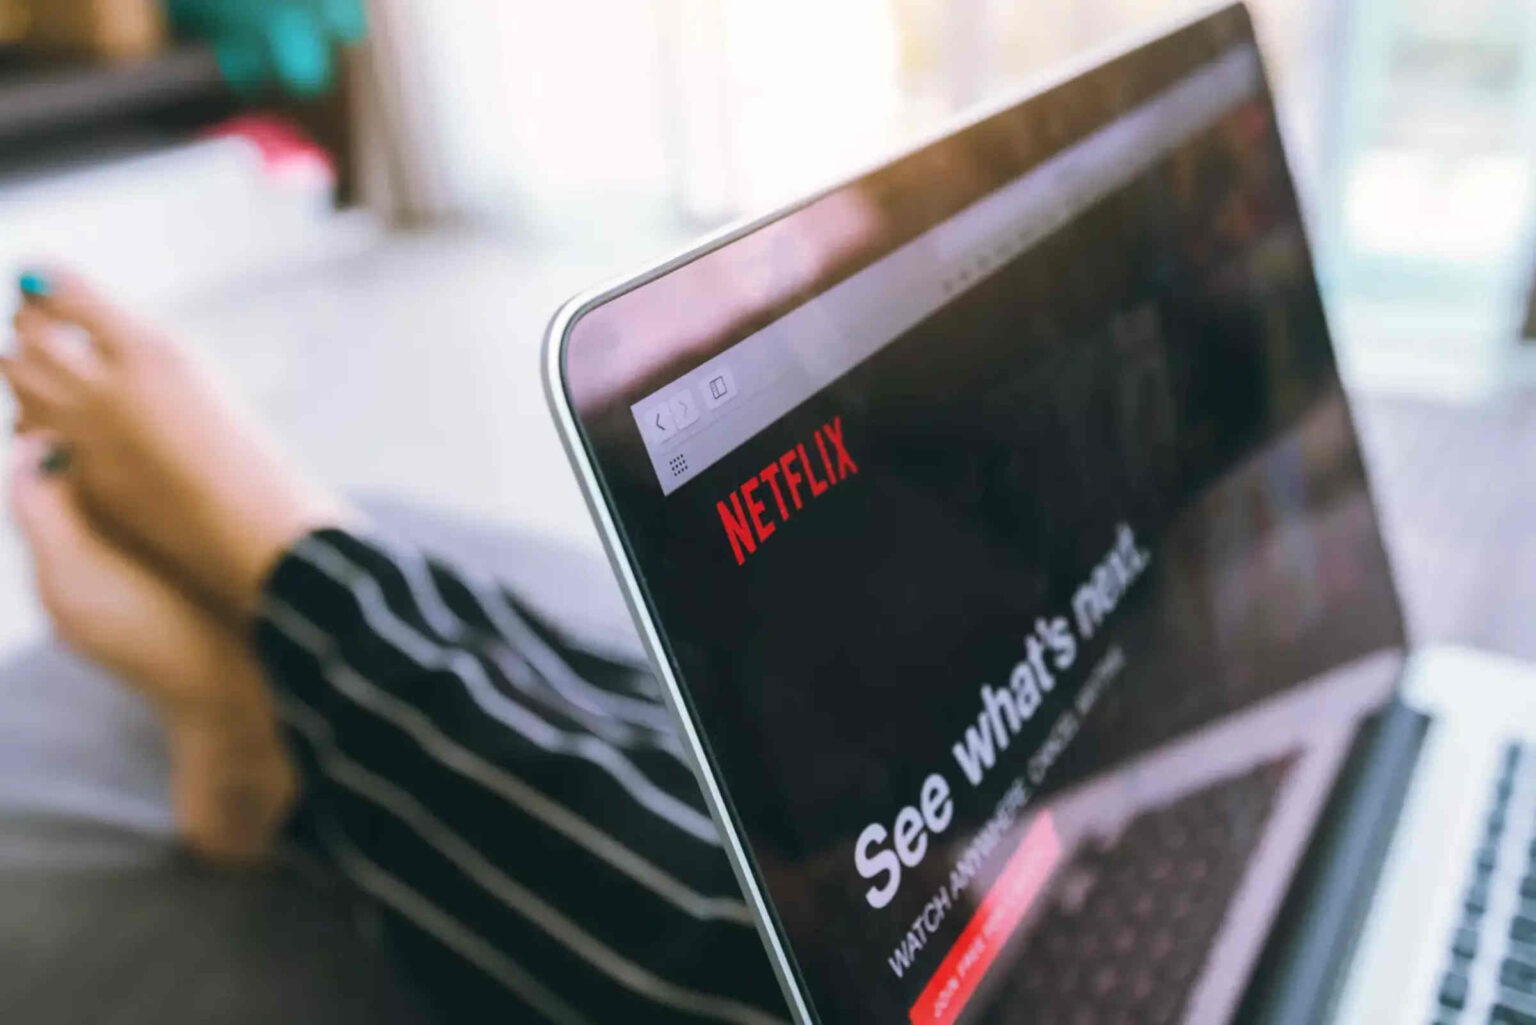 Sharing passwords might eventually mean a price increase for Netflix customers, but here's how you can get around having to pay extra!